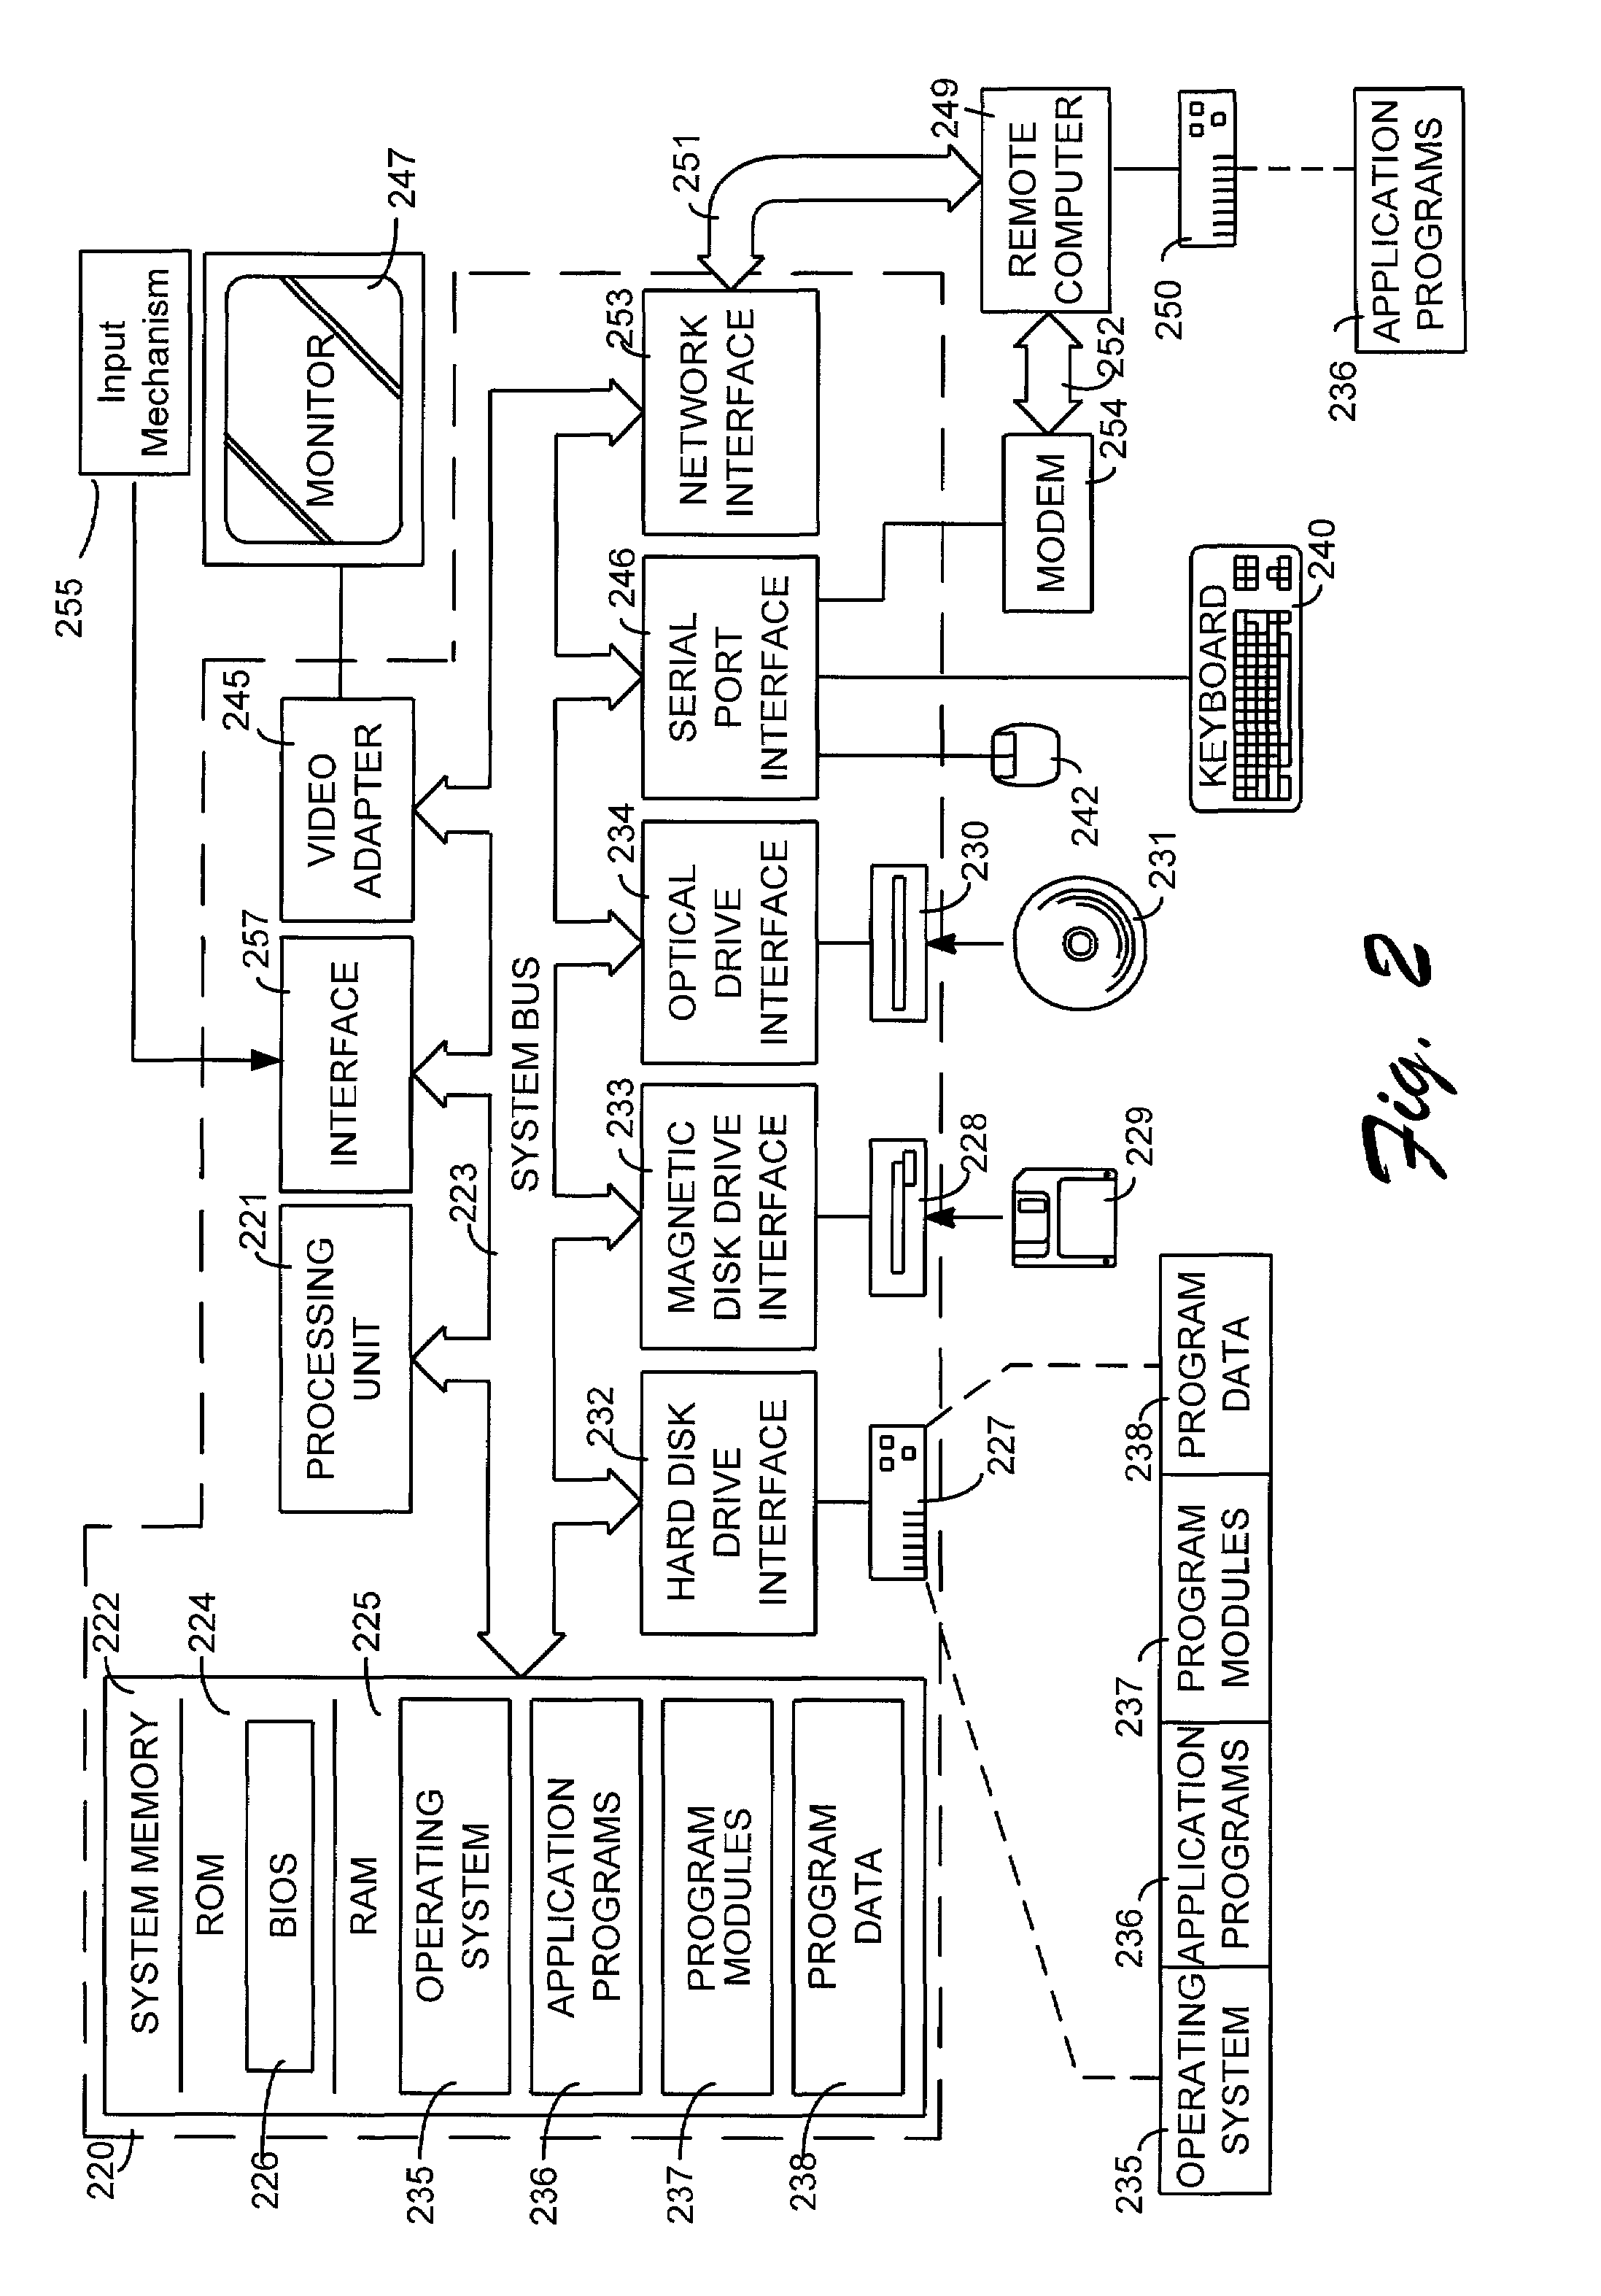 Playback control methods and arrangements for a DVD player